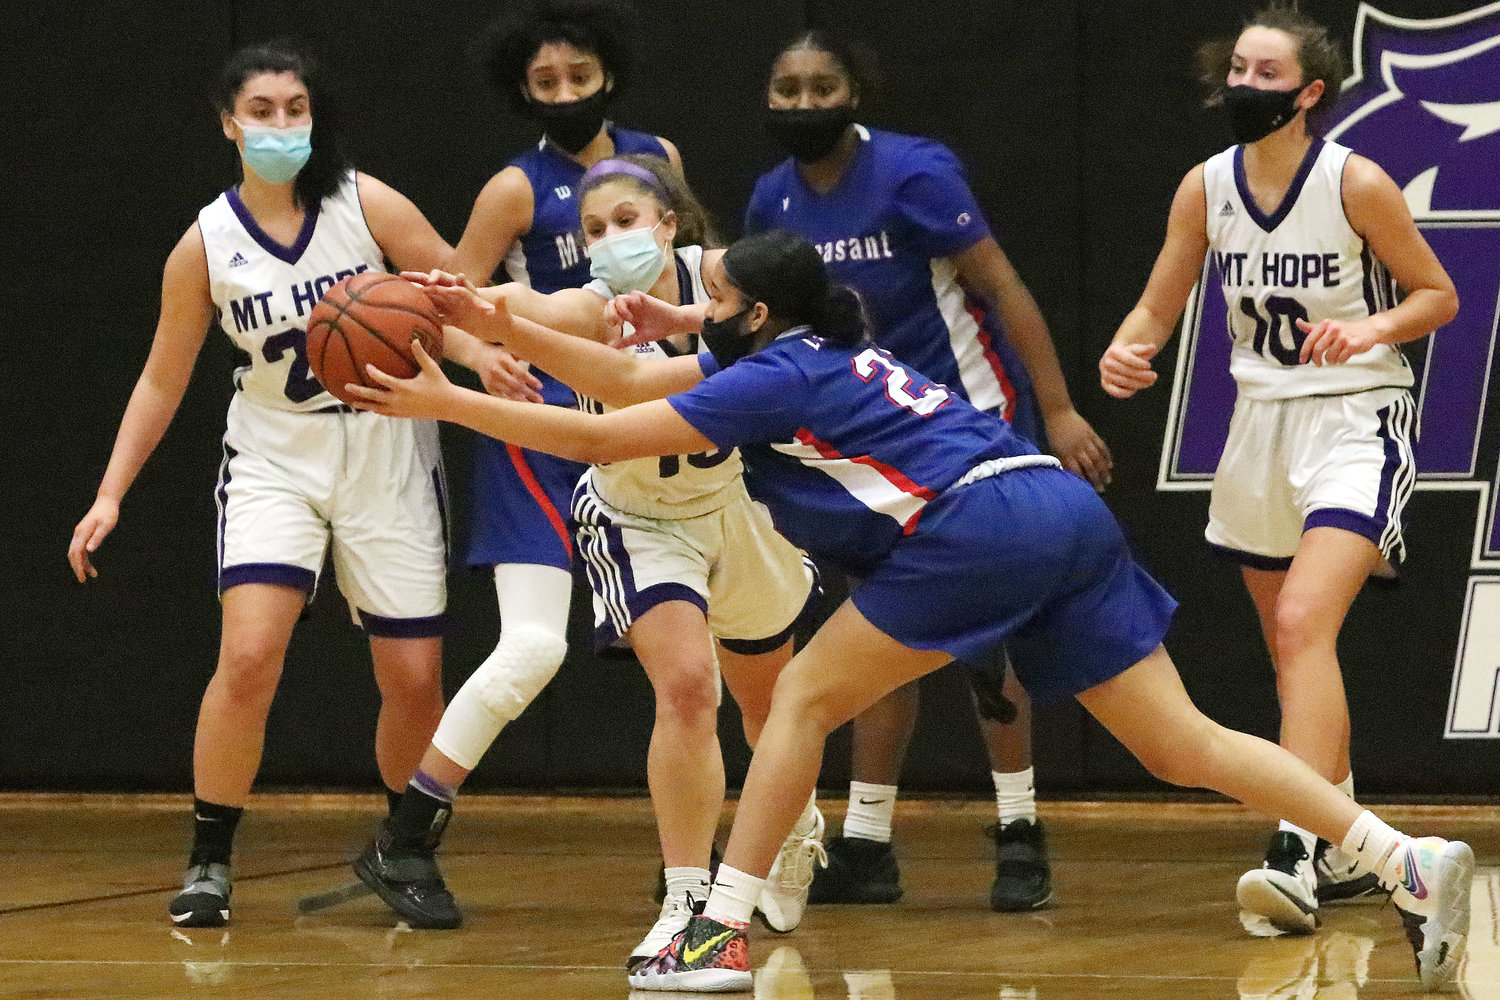 Point guard Abby Razzino pokes away a Mt. Pleasant pass, eventually stealing the ball.